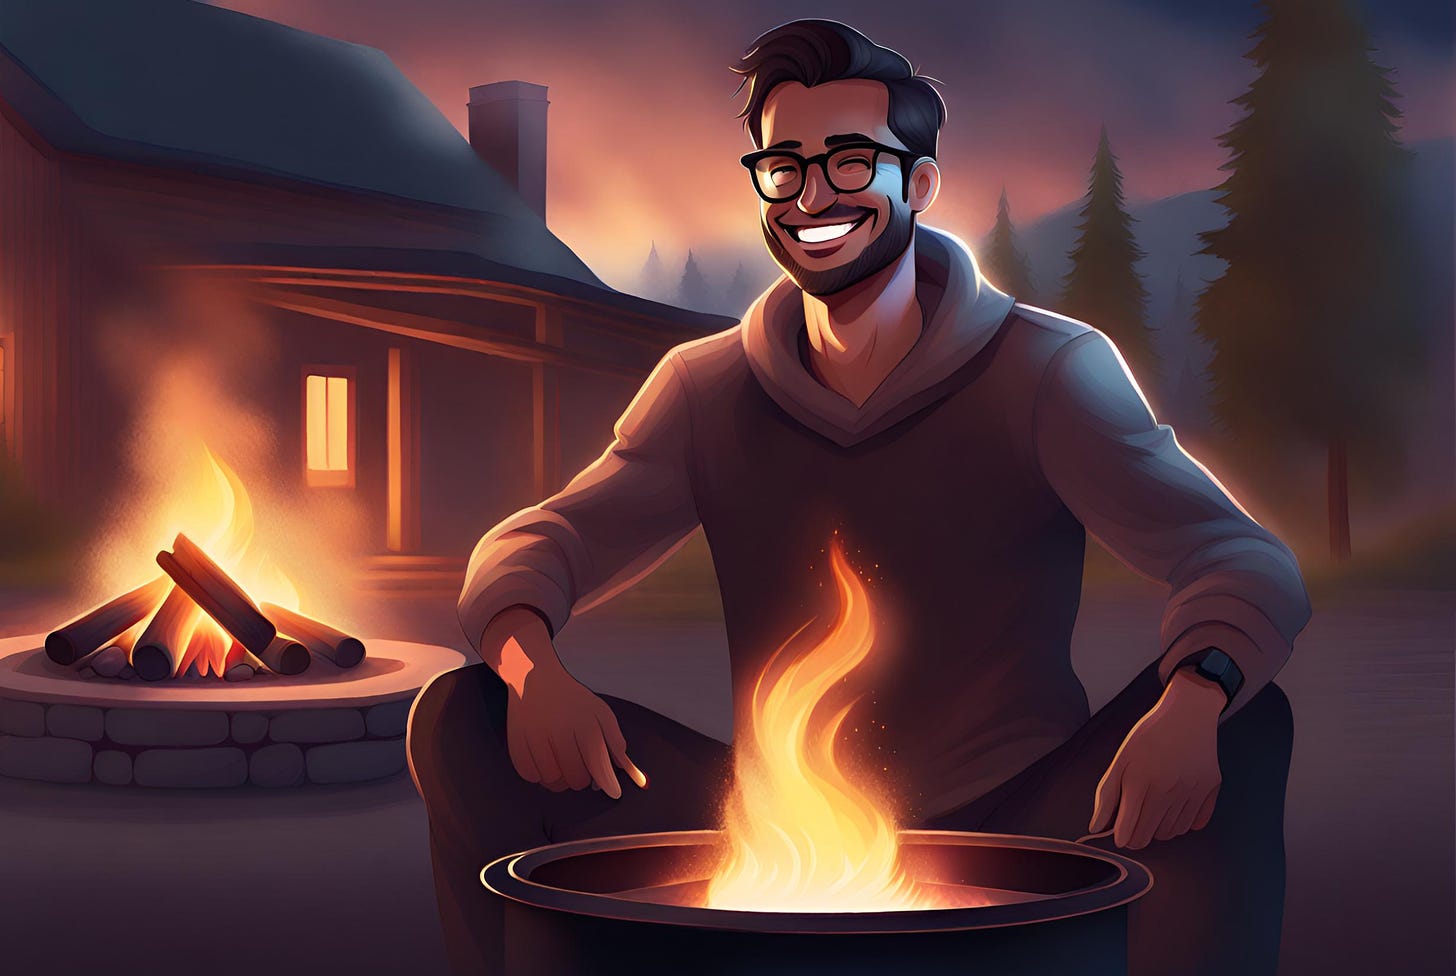 Illustration of a smiling man sitting next to a fire pit